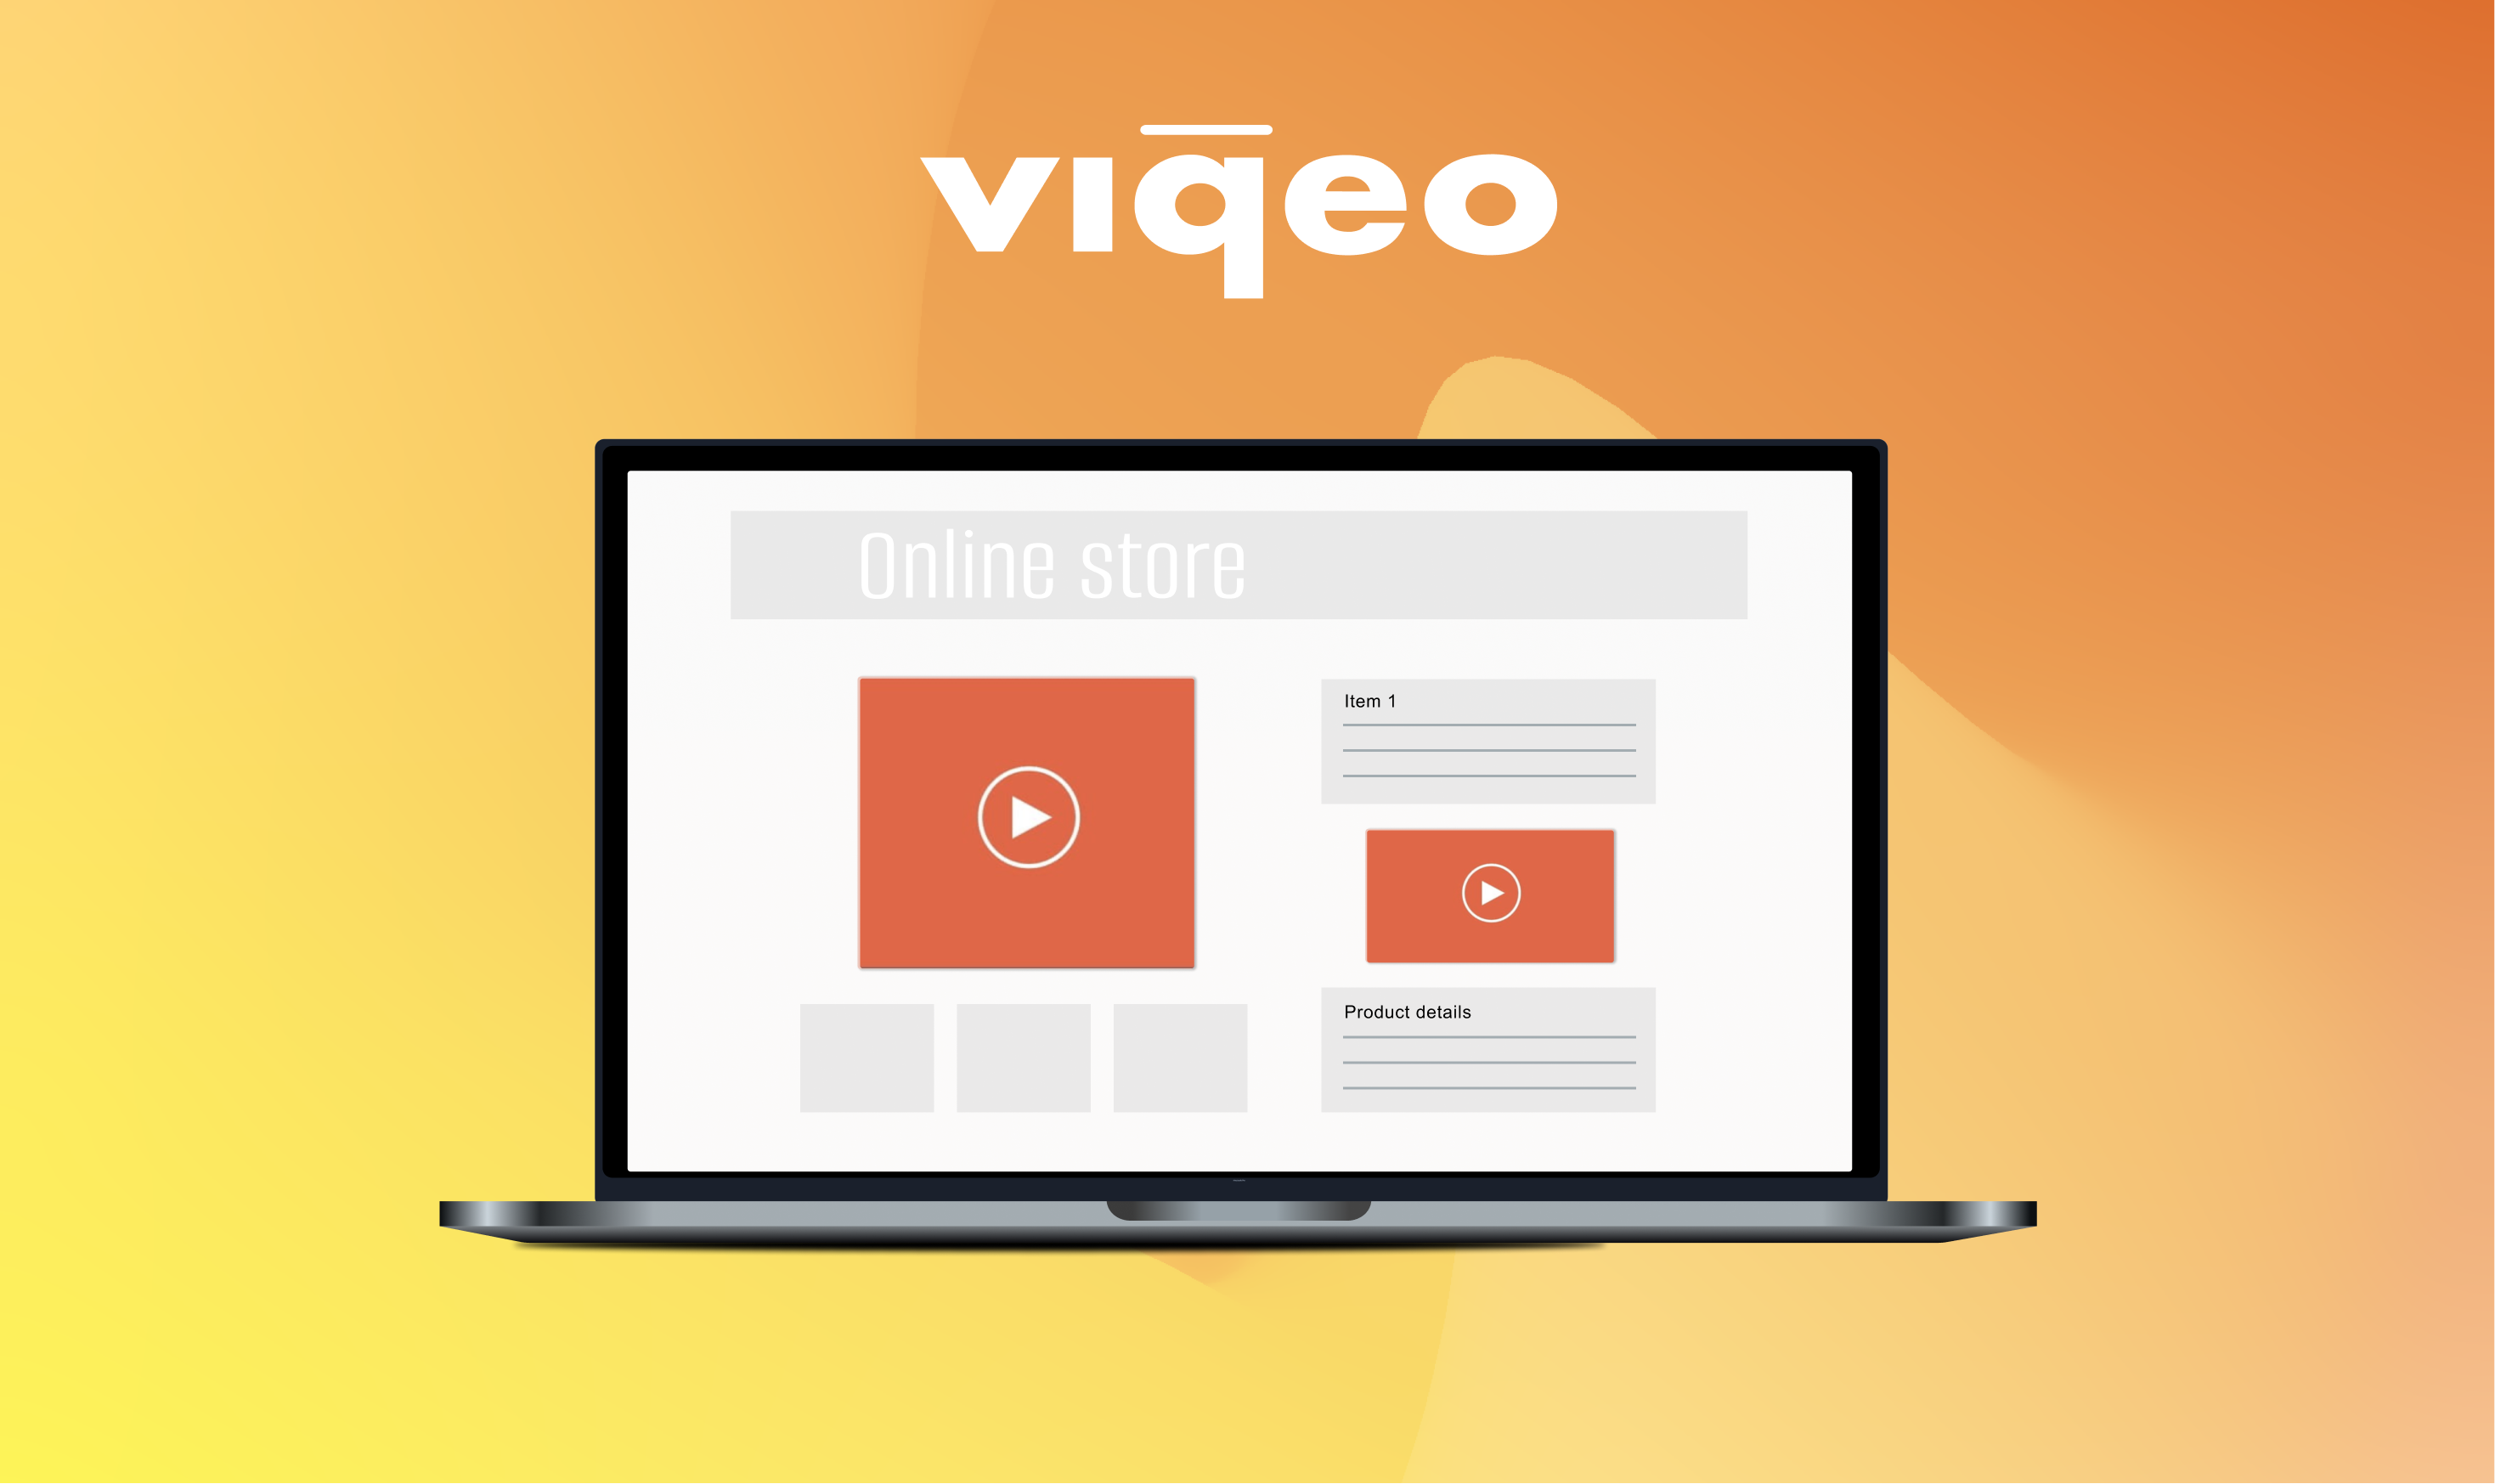 e-commerce video player for online shop